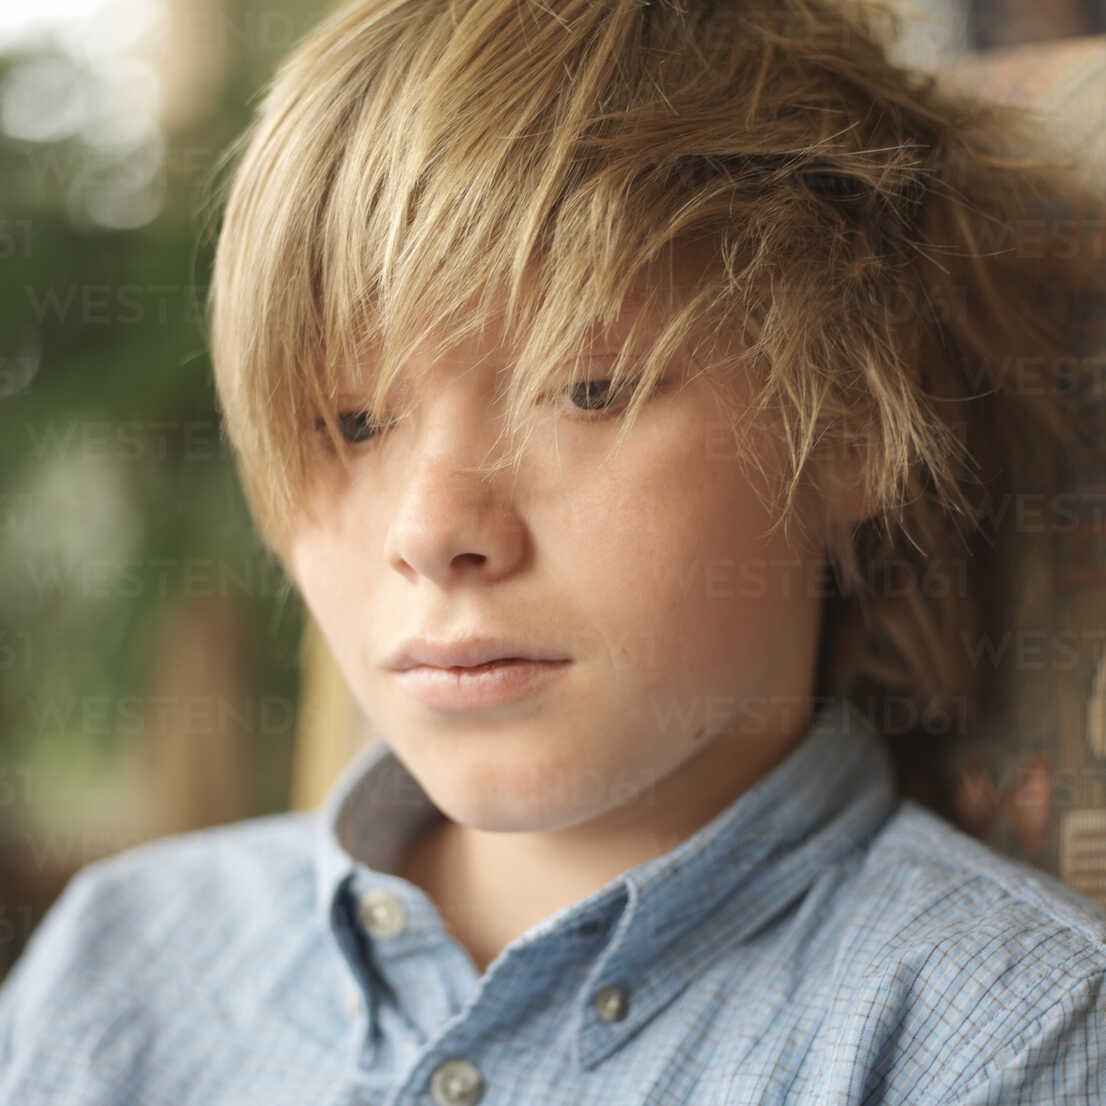 Portrait of tween boy with messy hair stock photo